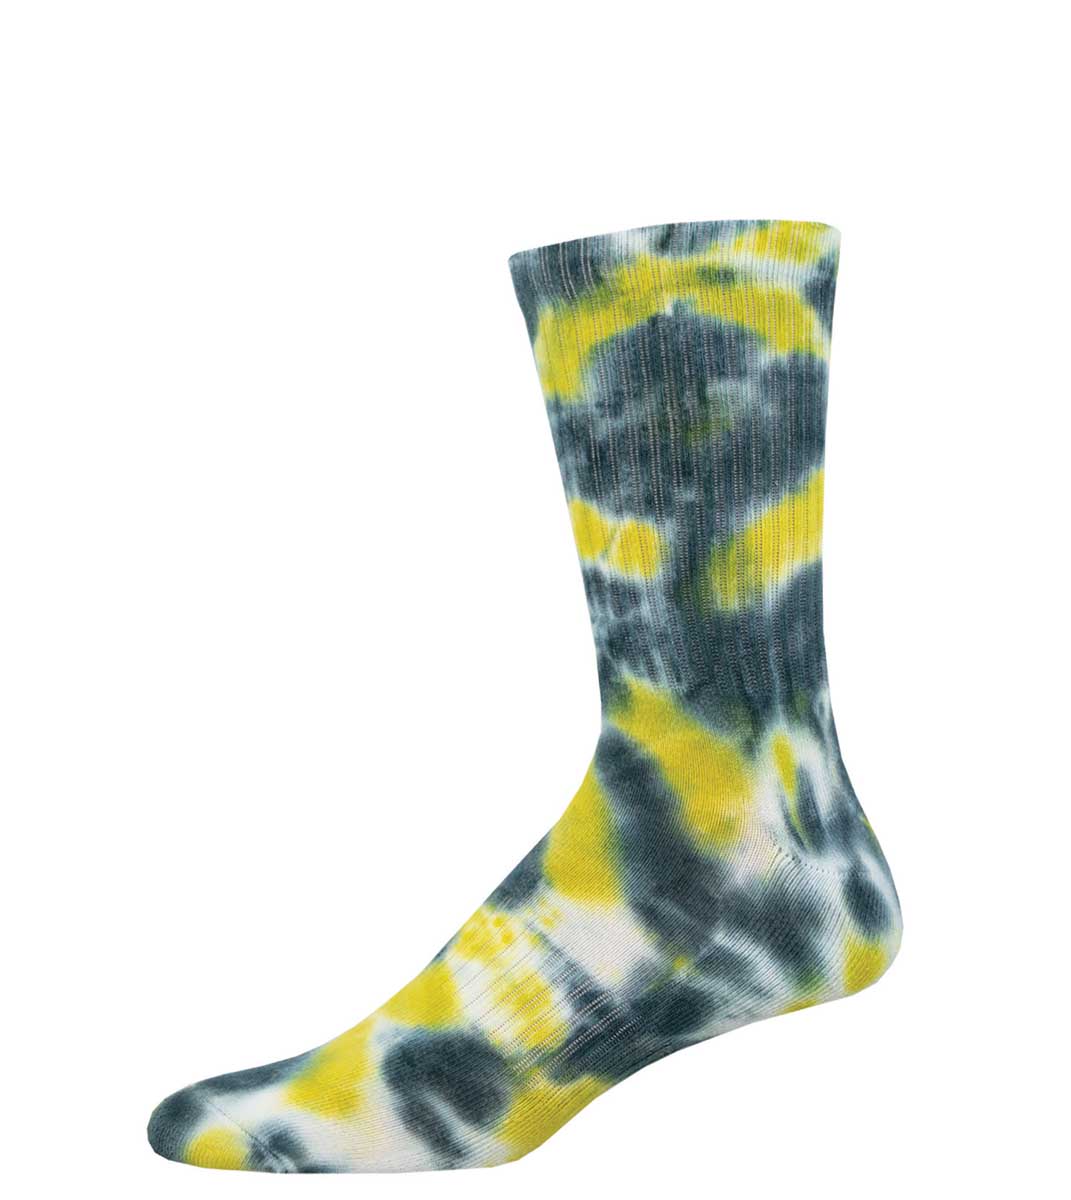 Colorful Tie-Dye Socks for Women and Men